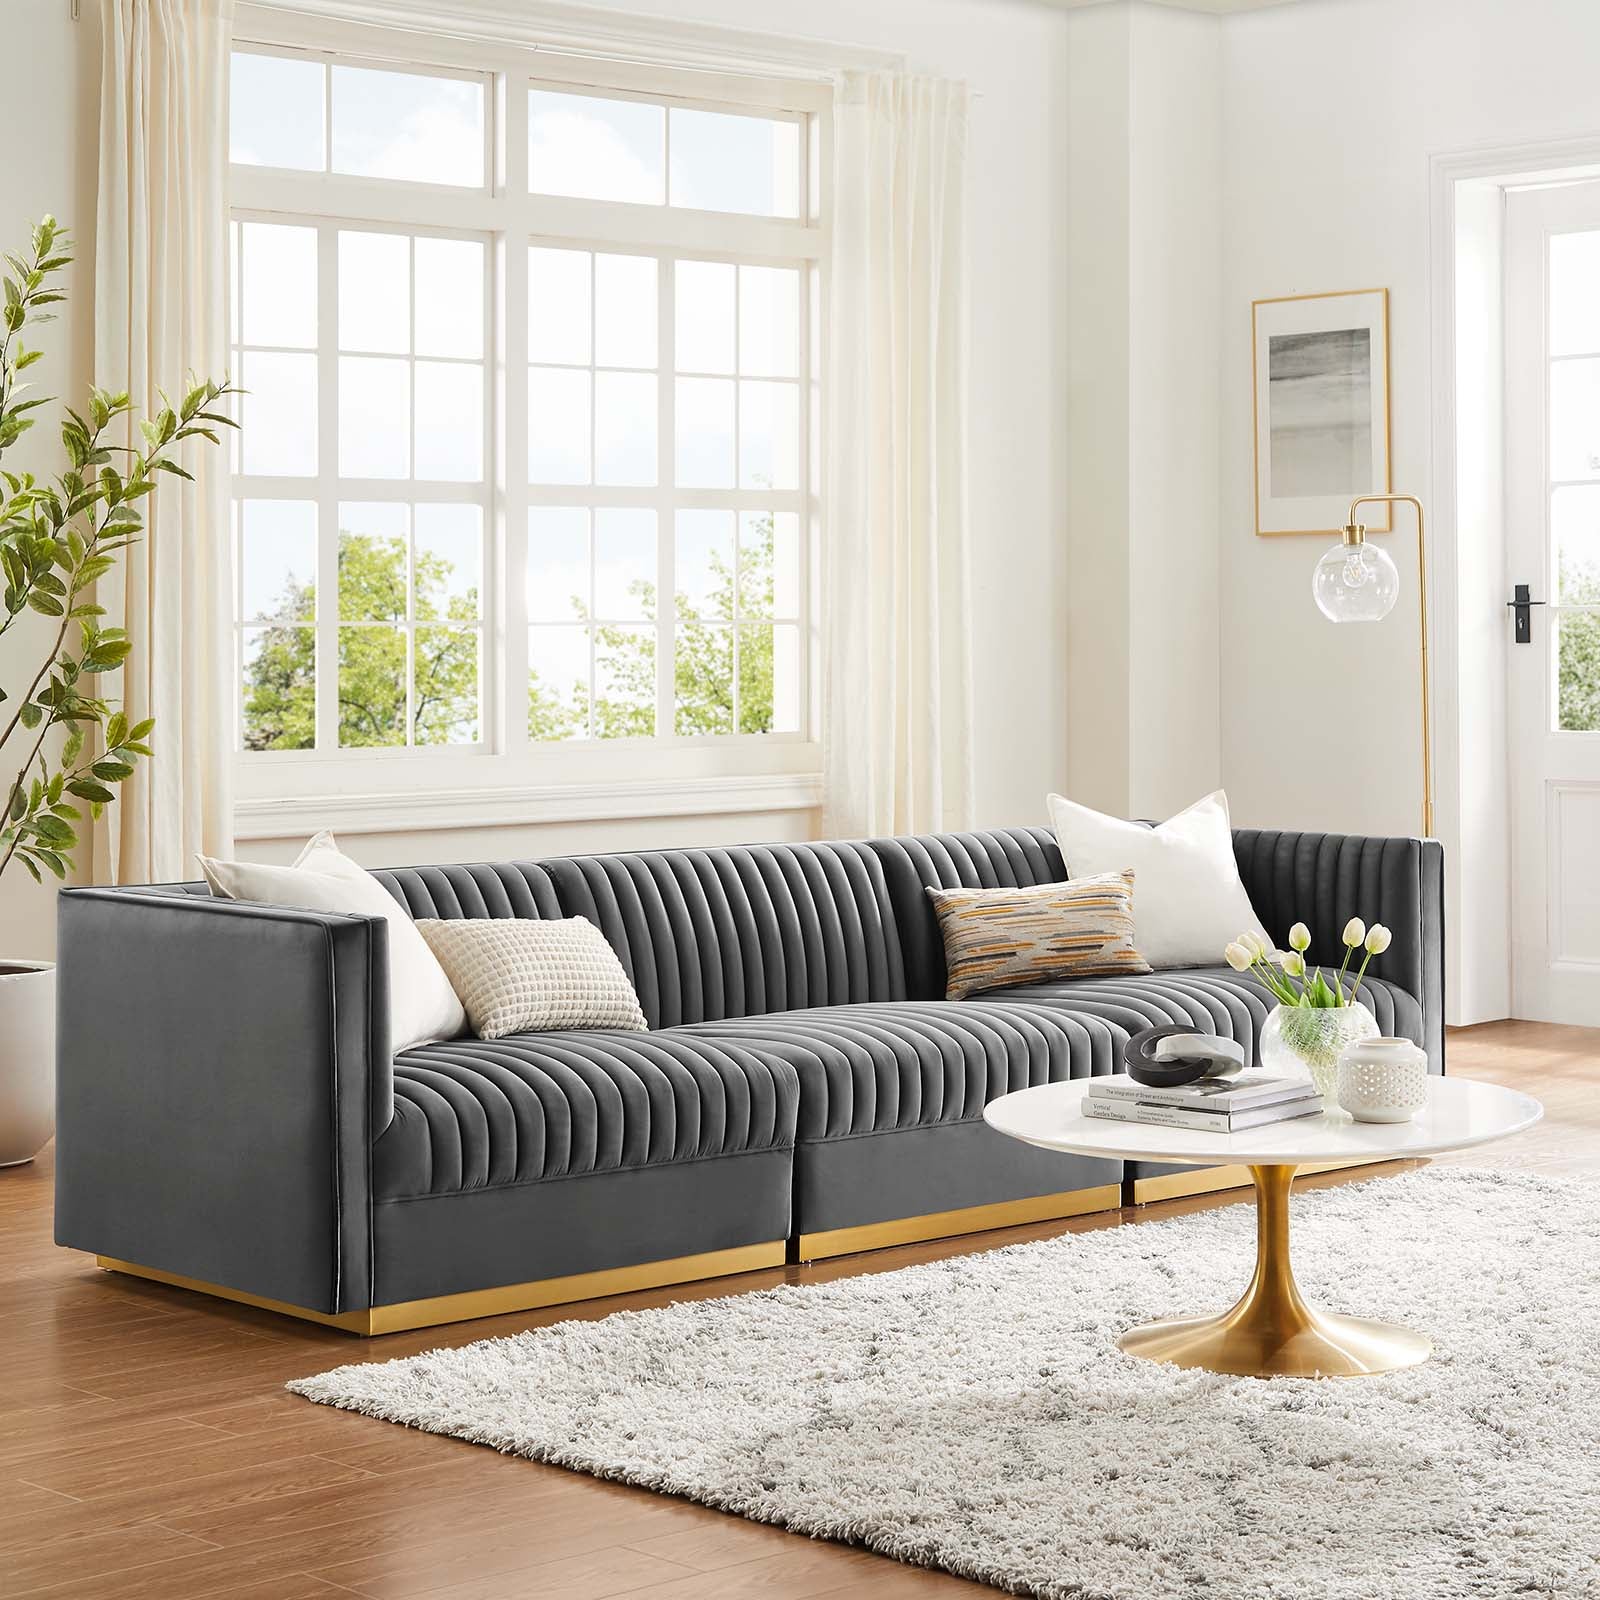 Modway Sectional Sofas - Sanguine Channel Tufted Performance Velvet 3-Seat Modular Sectional Sofa Gray